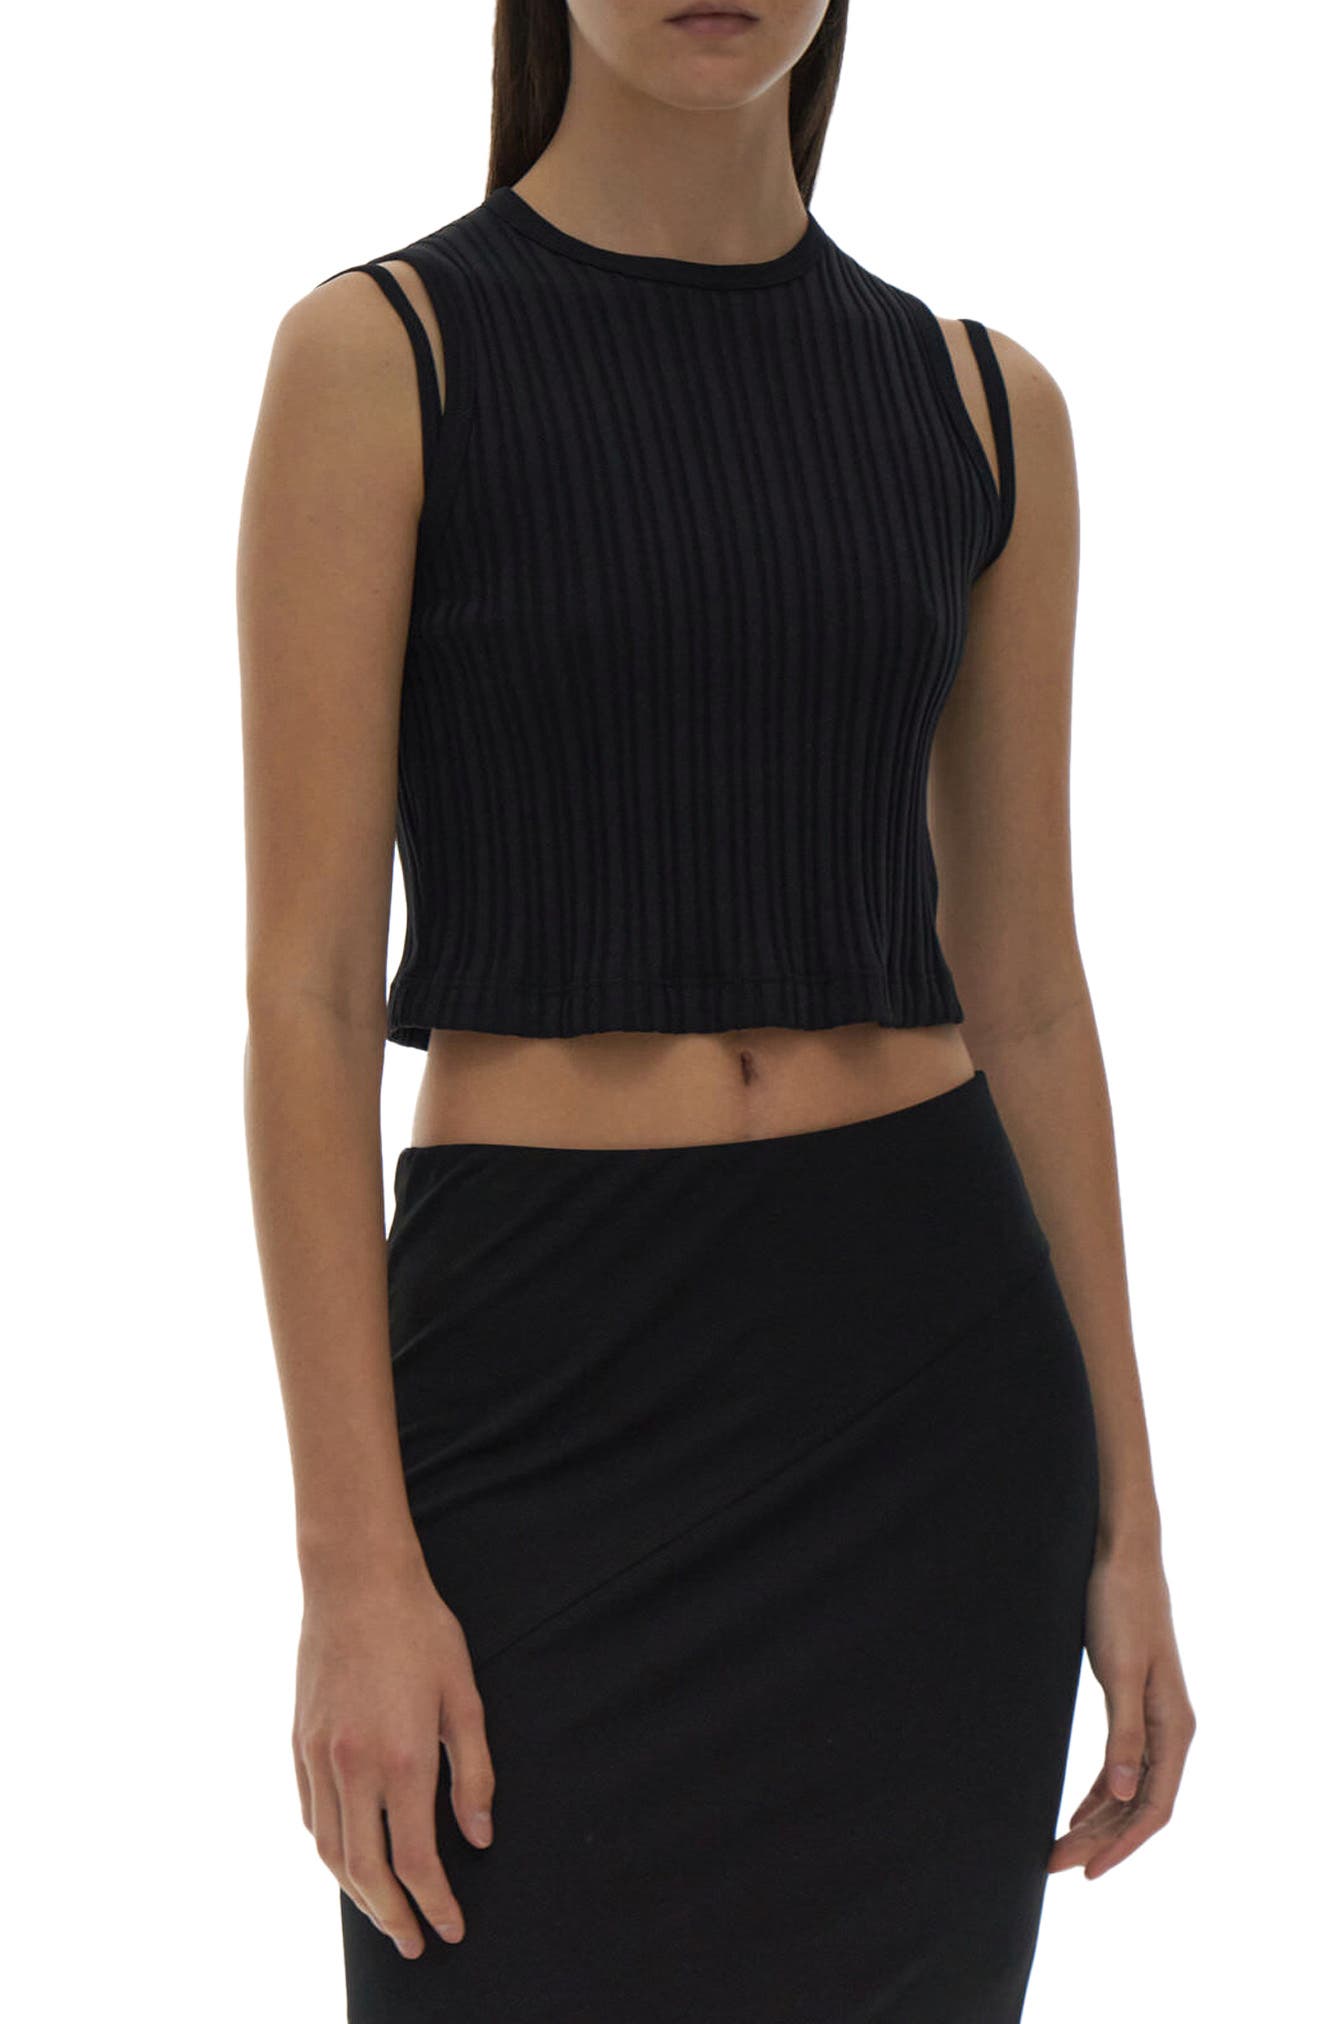 Helmut Lang Rib Cotton Muscle Tank in Black at Nordstrom, Size Large